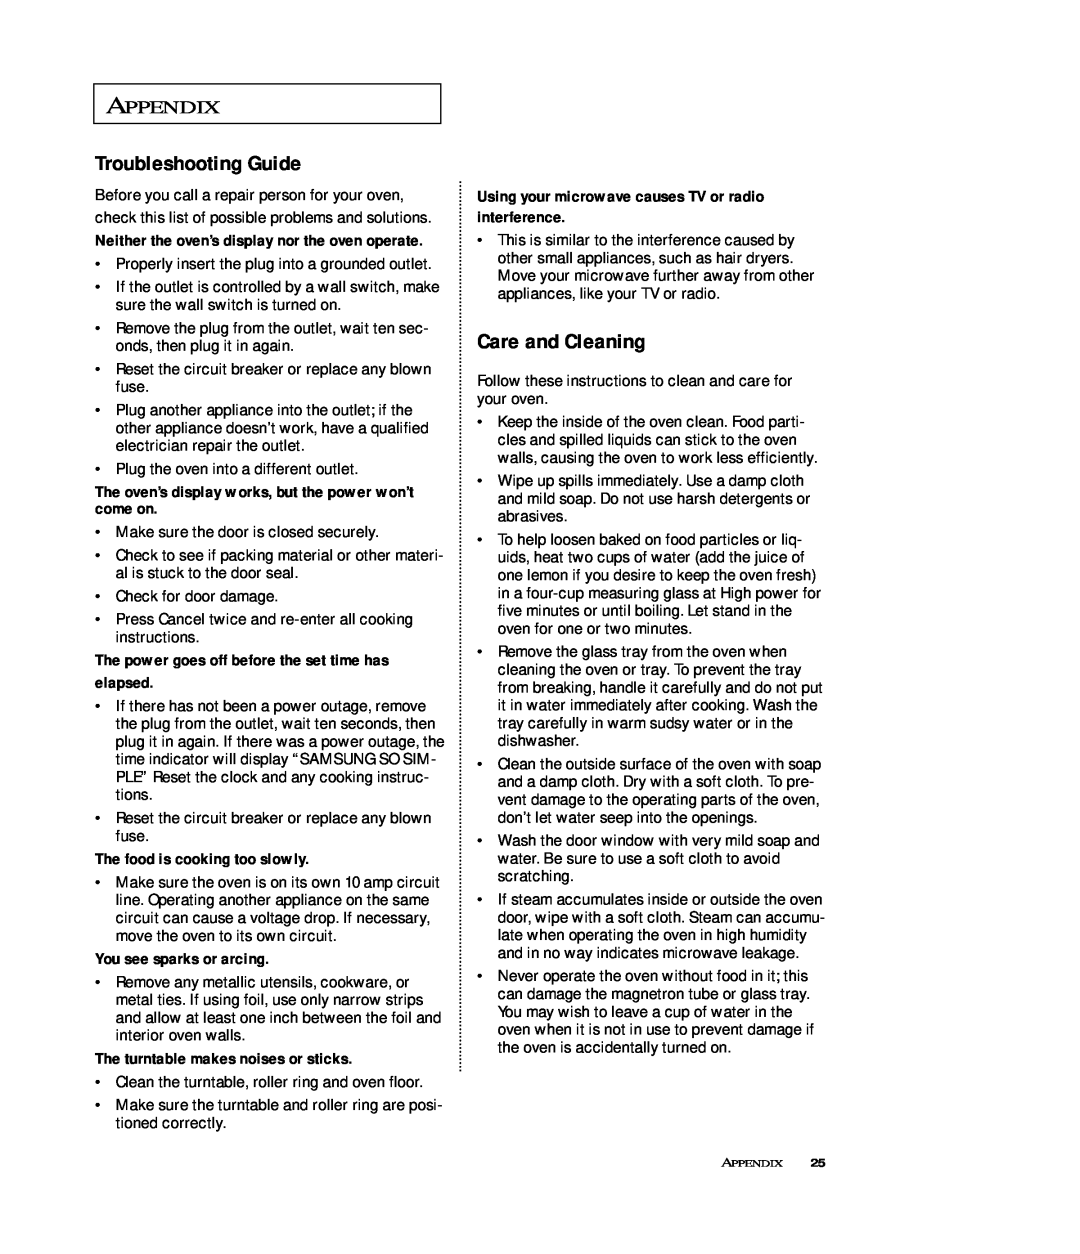 Samsung MB7696W, MB7697G manual Troubleshooting Guide, Care and Cleaning, Appendix 